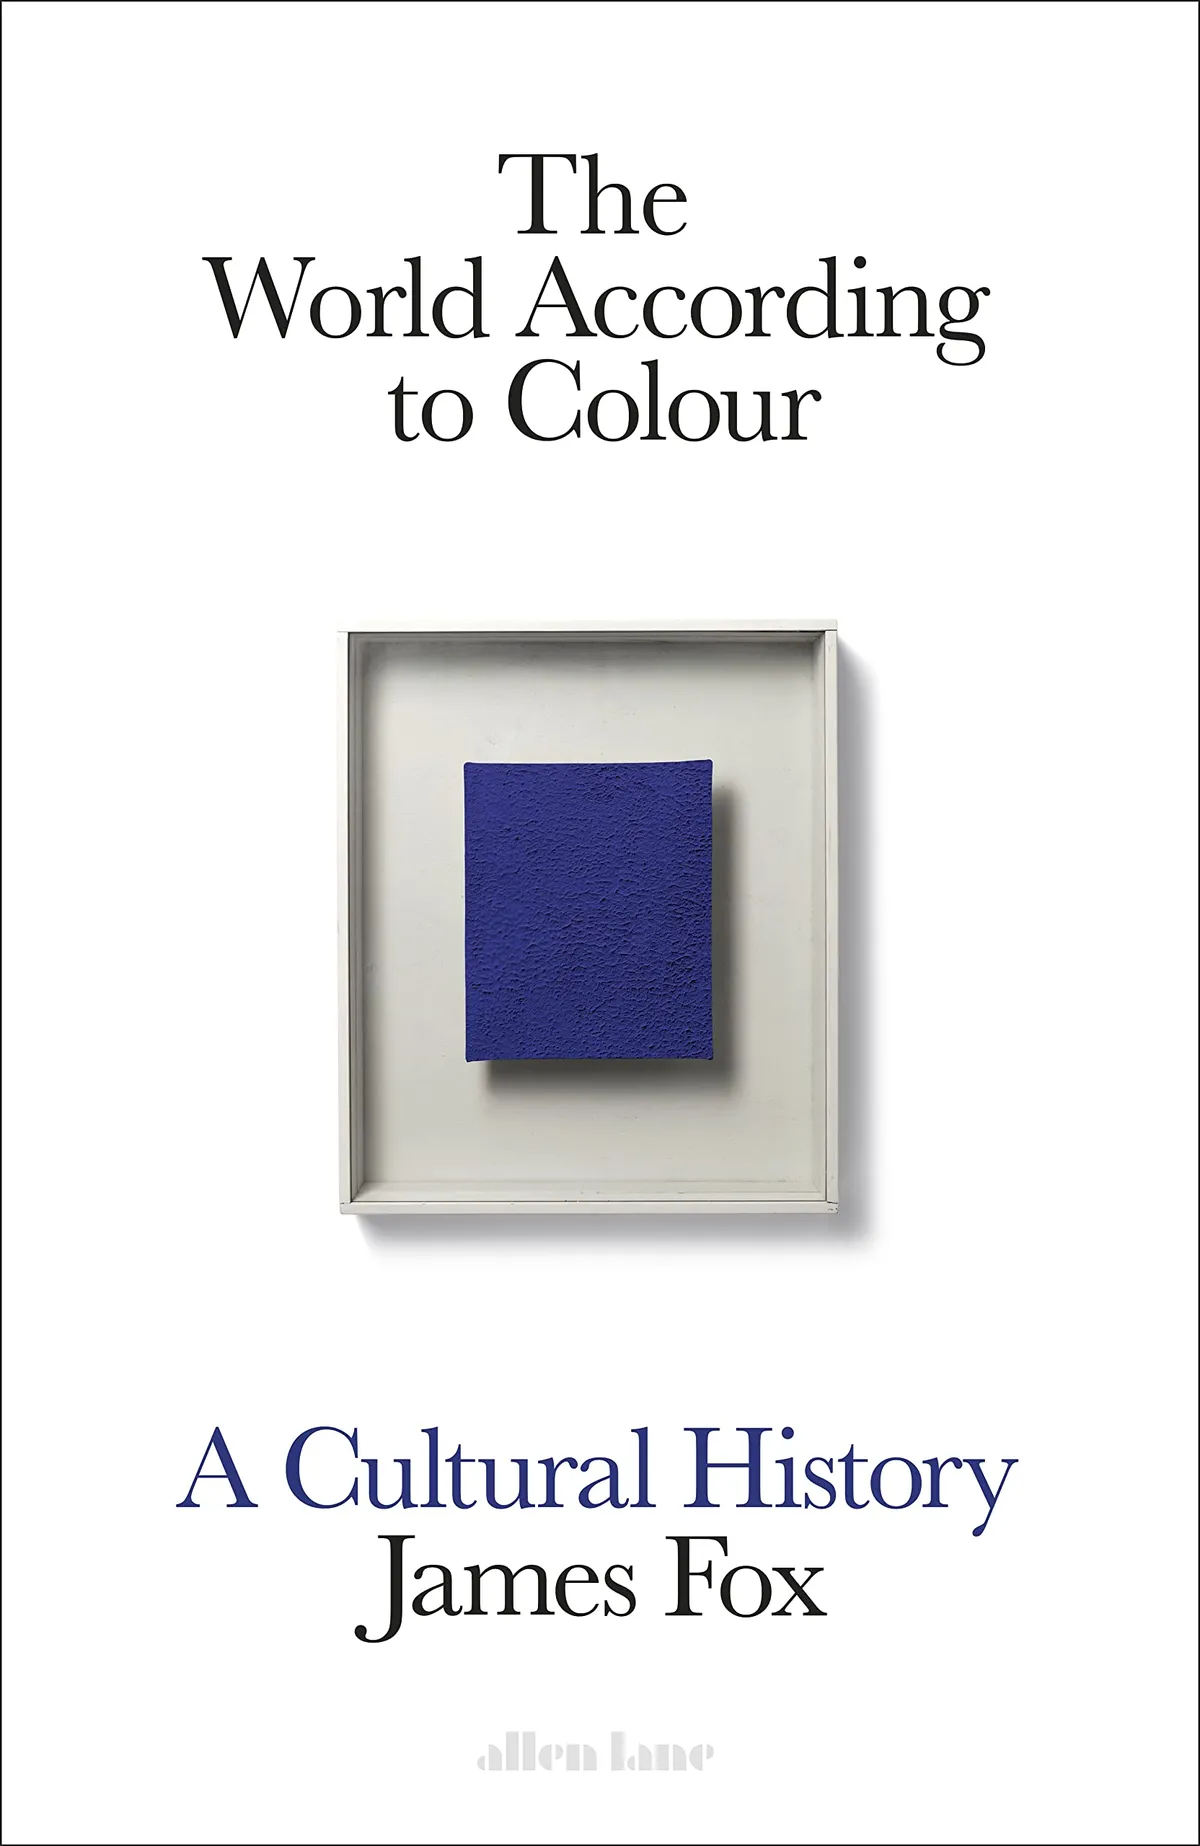 The World According to Colour: A Cultural History, James Fox